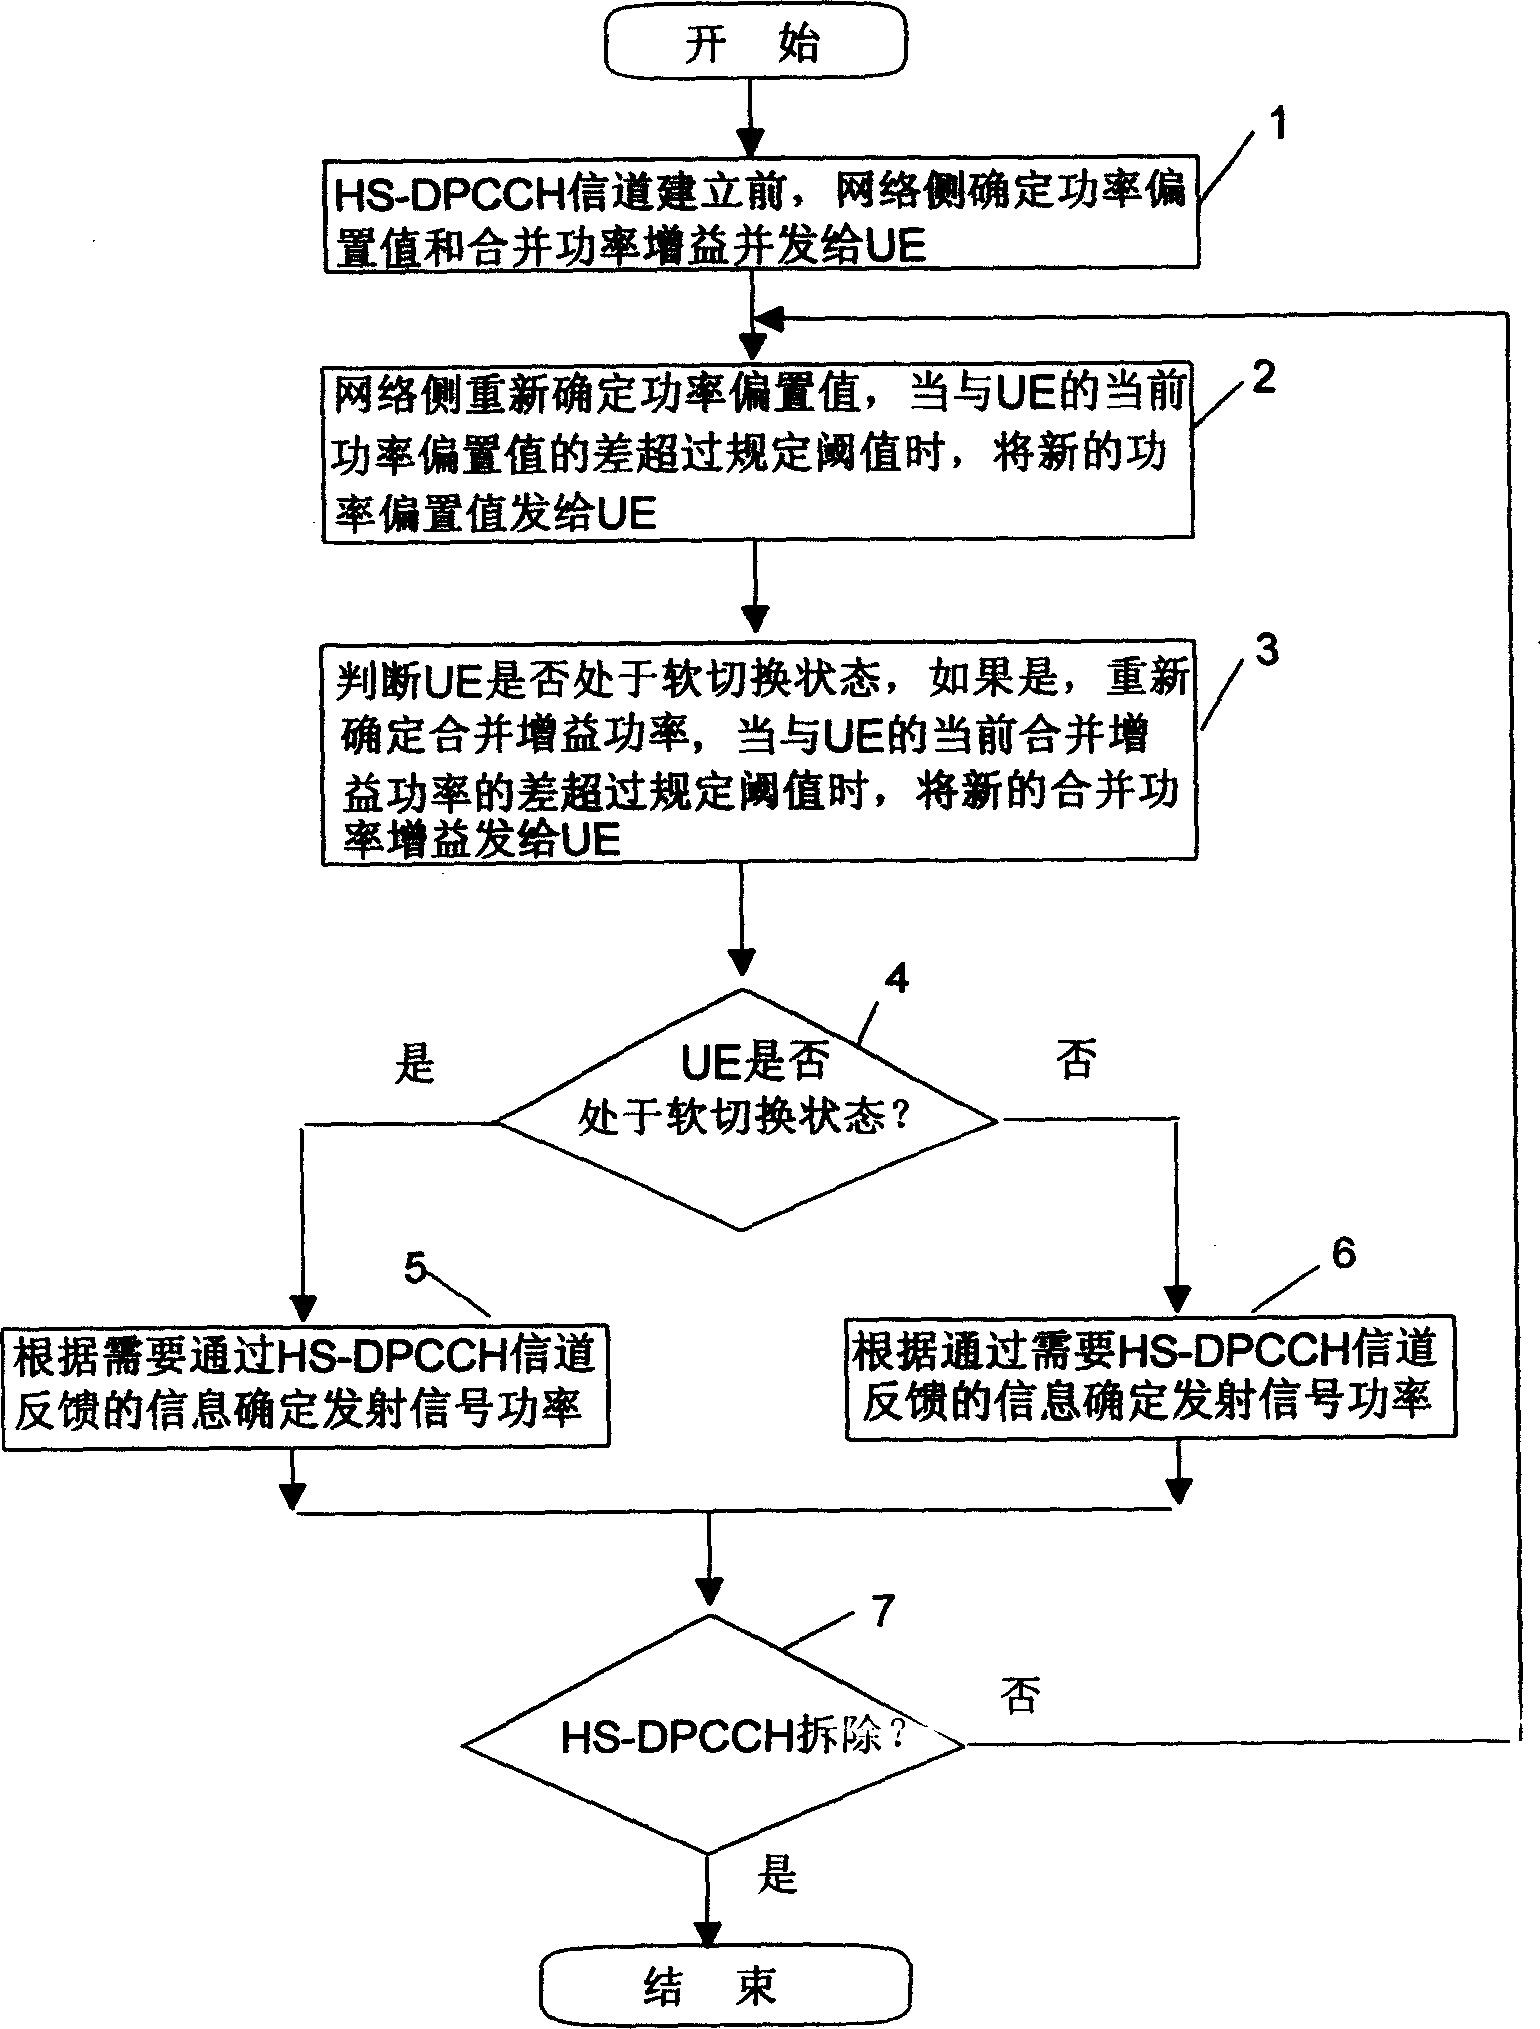 Power control method of high-speed physical control channel in high-speed data access system